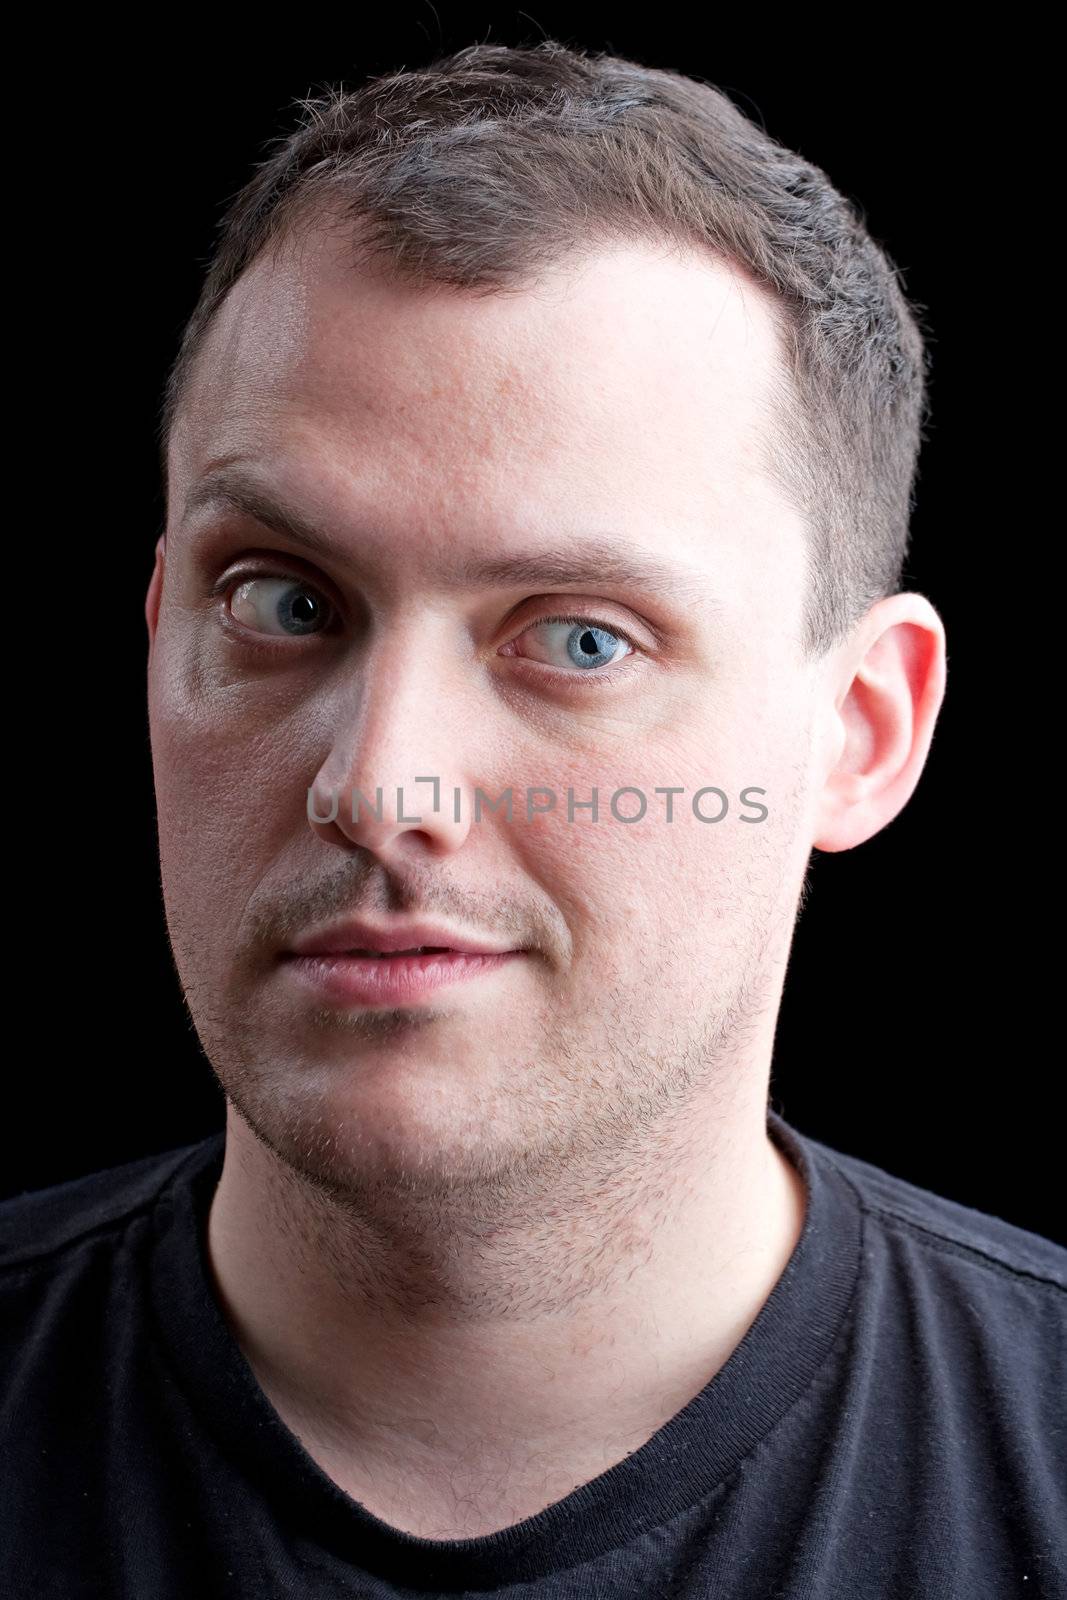 Worrying man with a skeptical or doubtful expression on his face isolated over a black background.